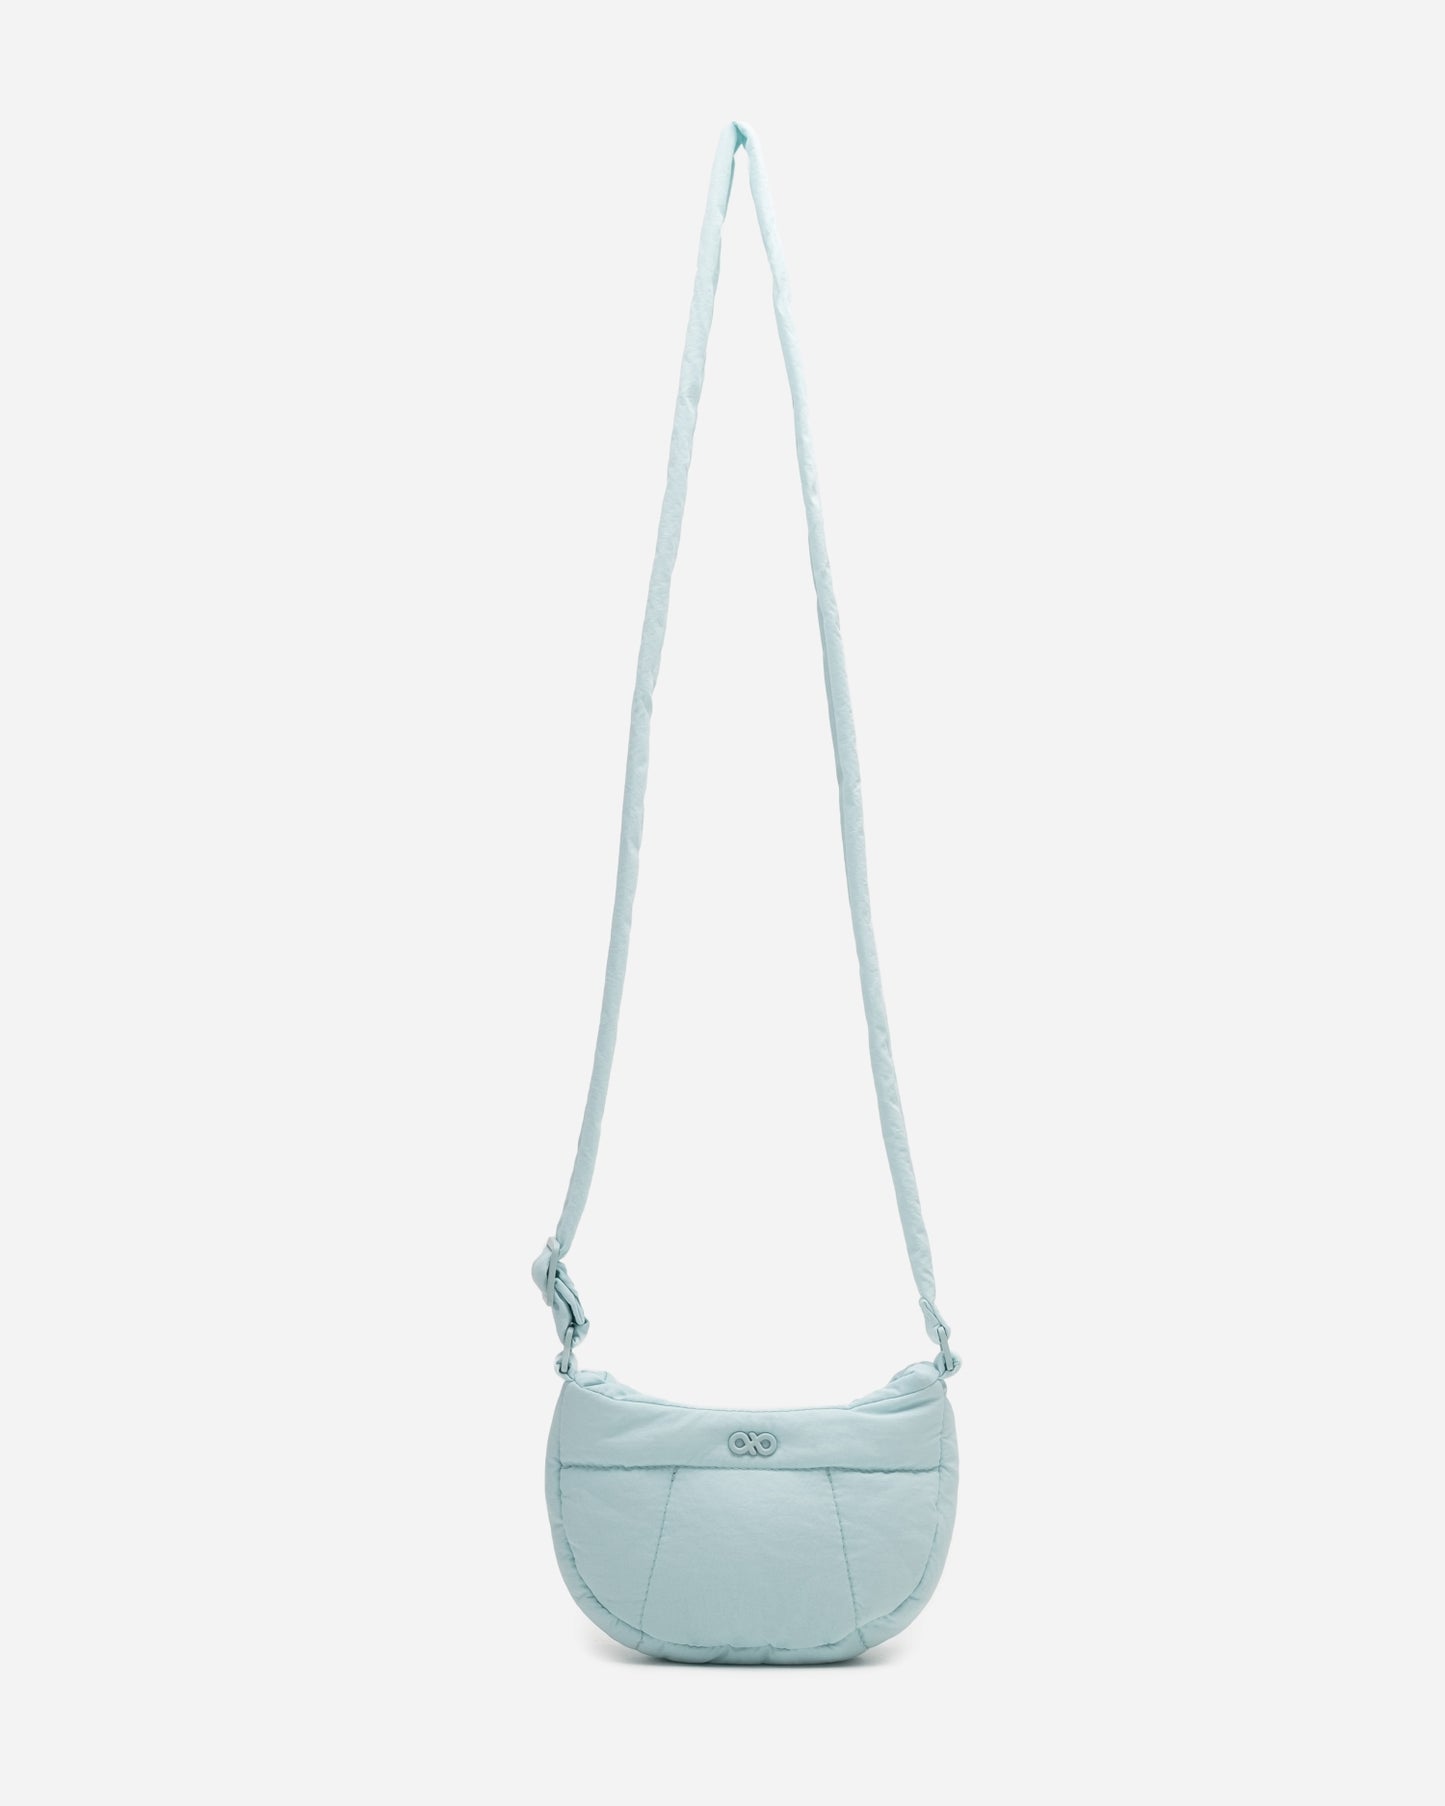 MICRO COSY PUFFY CROSSBODY BAG IN MINT (S)